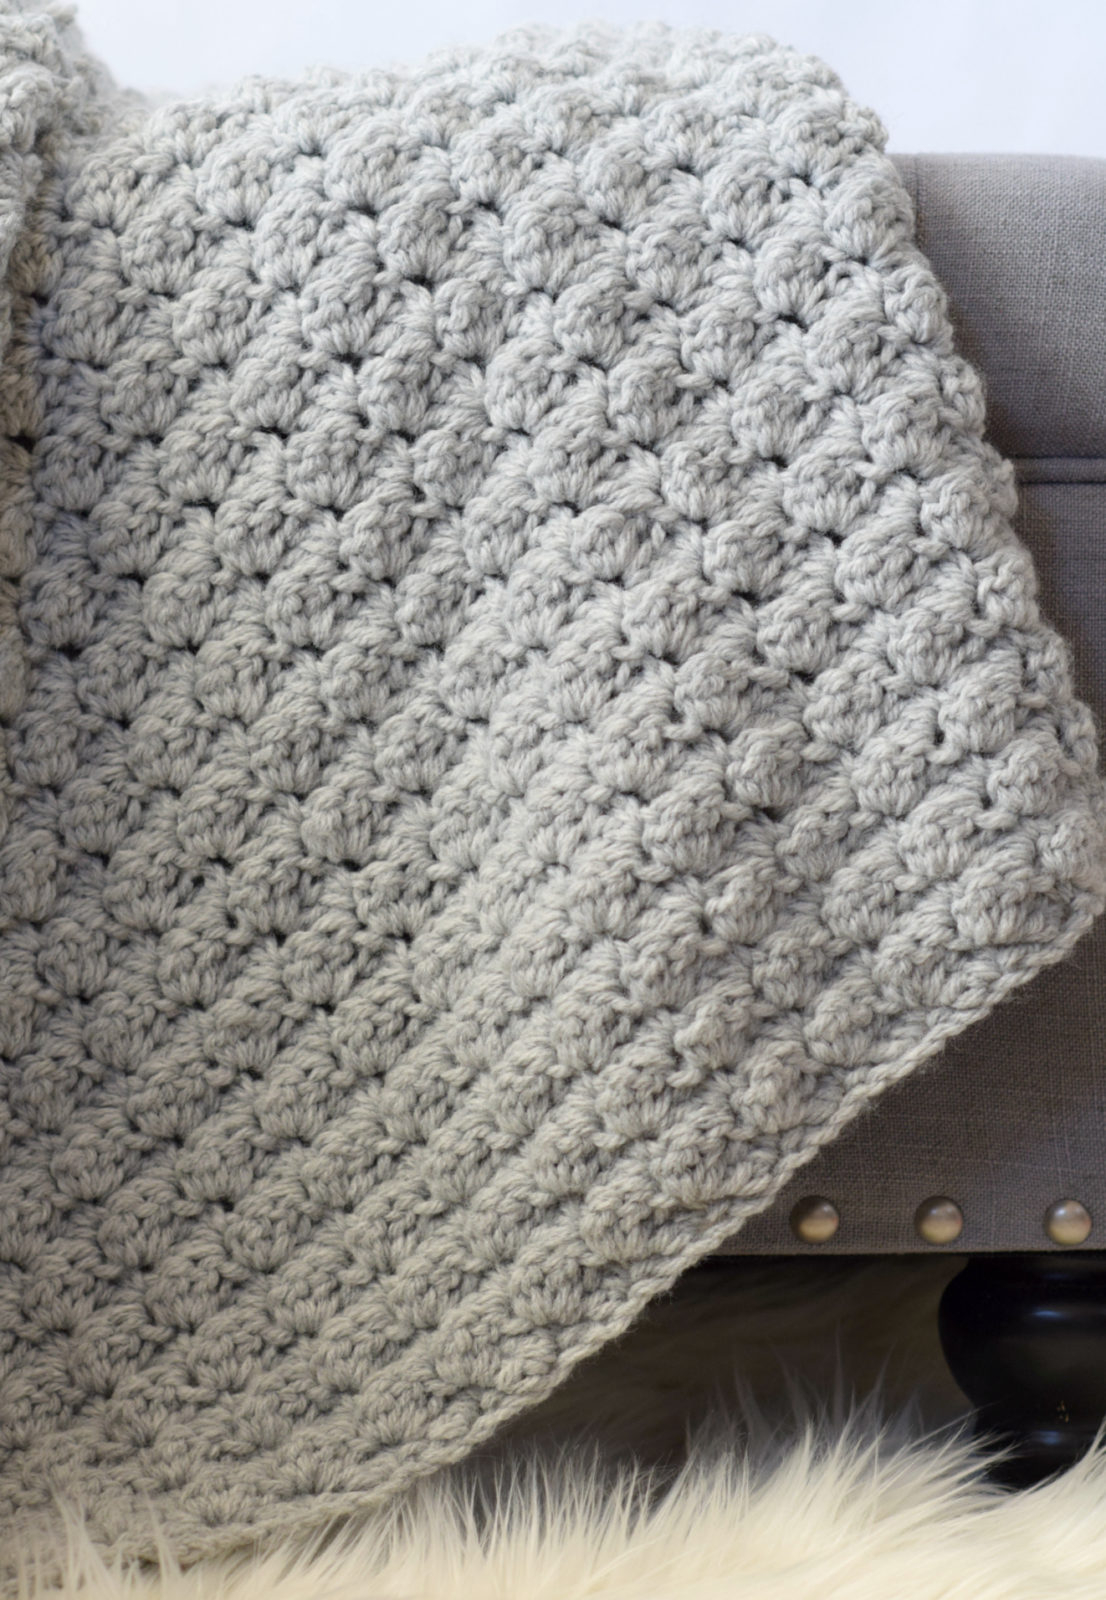 Bulky Crochet Blanket Pattern Simple Crocheted Blanket Go To Pattern Mama In A Stitch